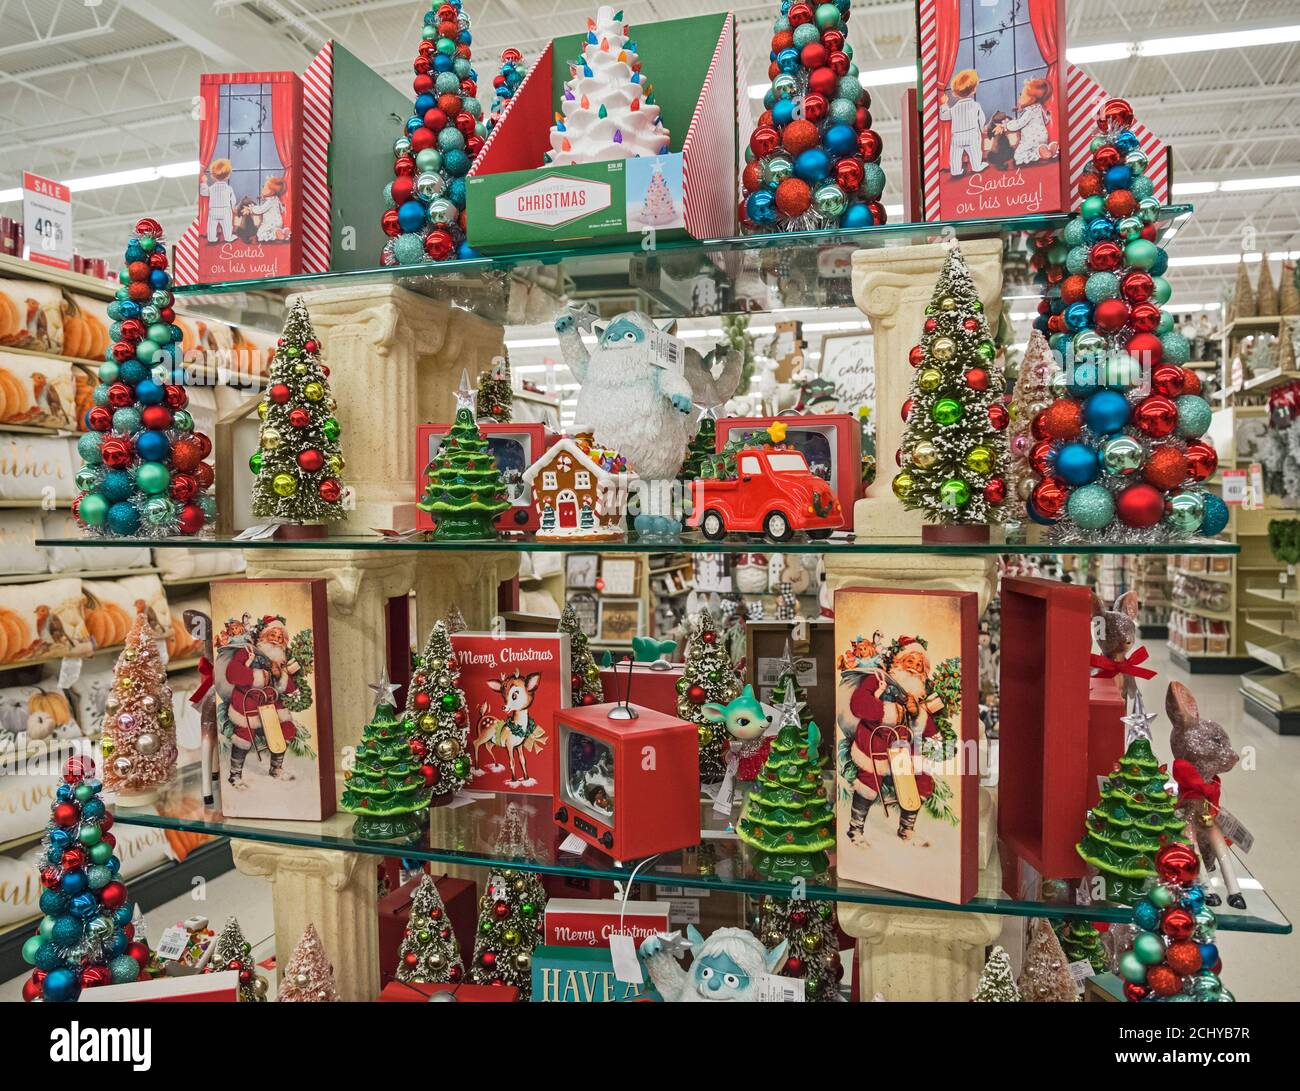 Cooperativa Adentro Norma Christmas shopping and decorations in a home store Stock Photo - Alamy